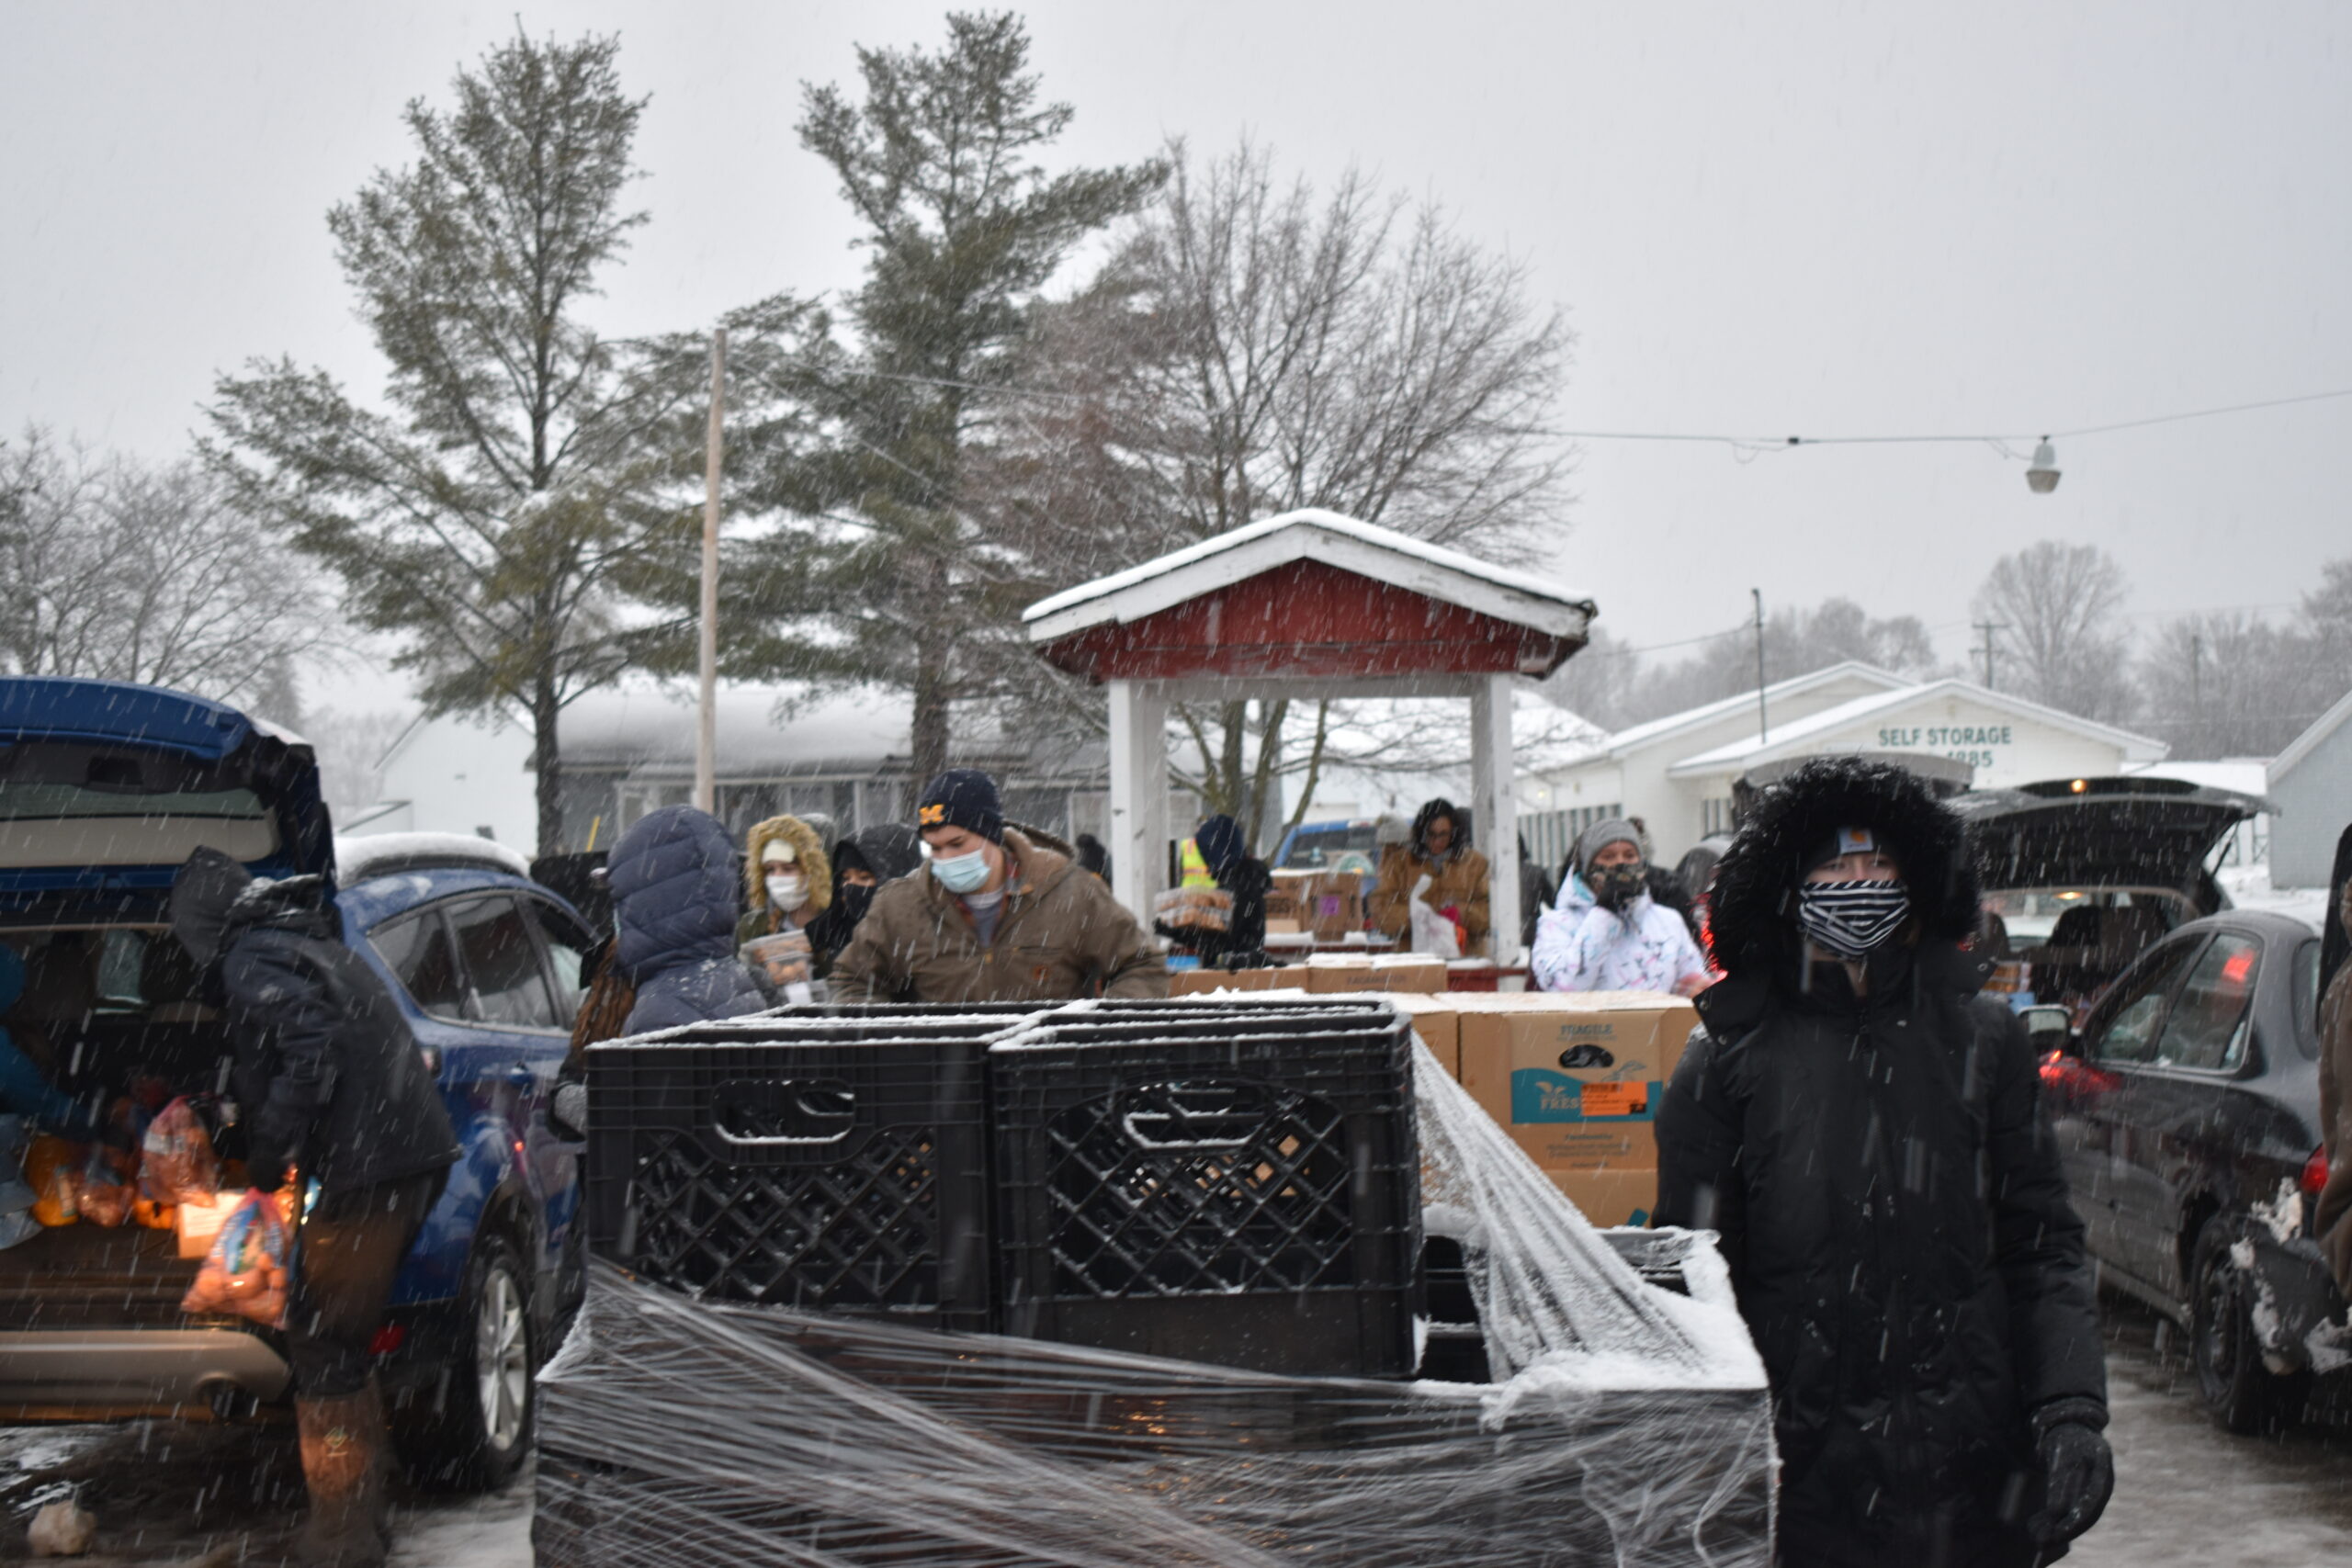 Volunteers load cars with food amid a snowy backdrop